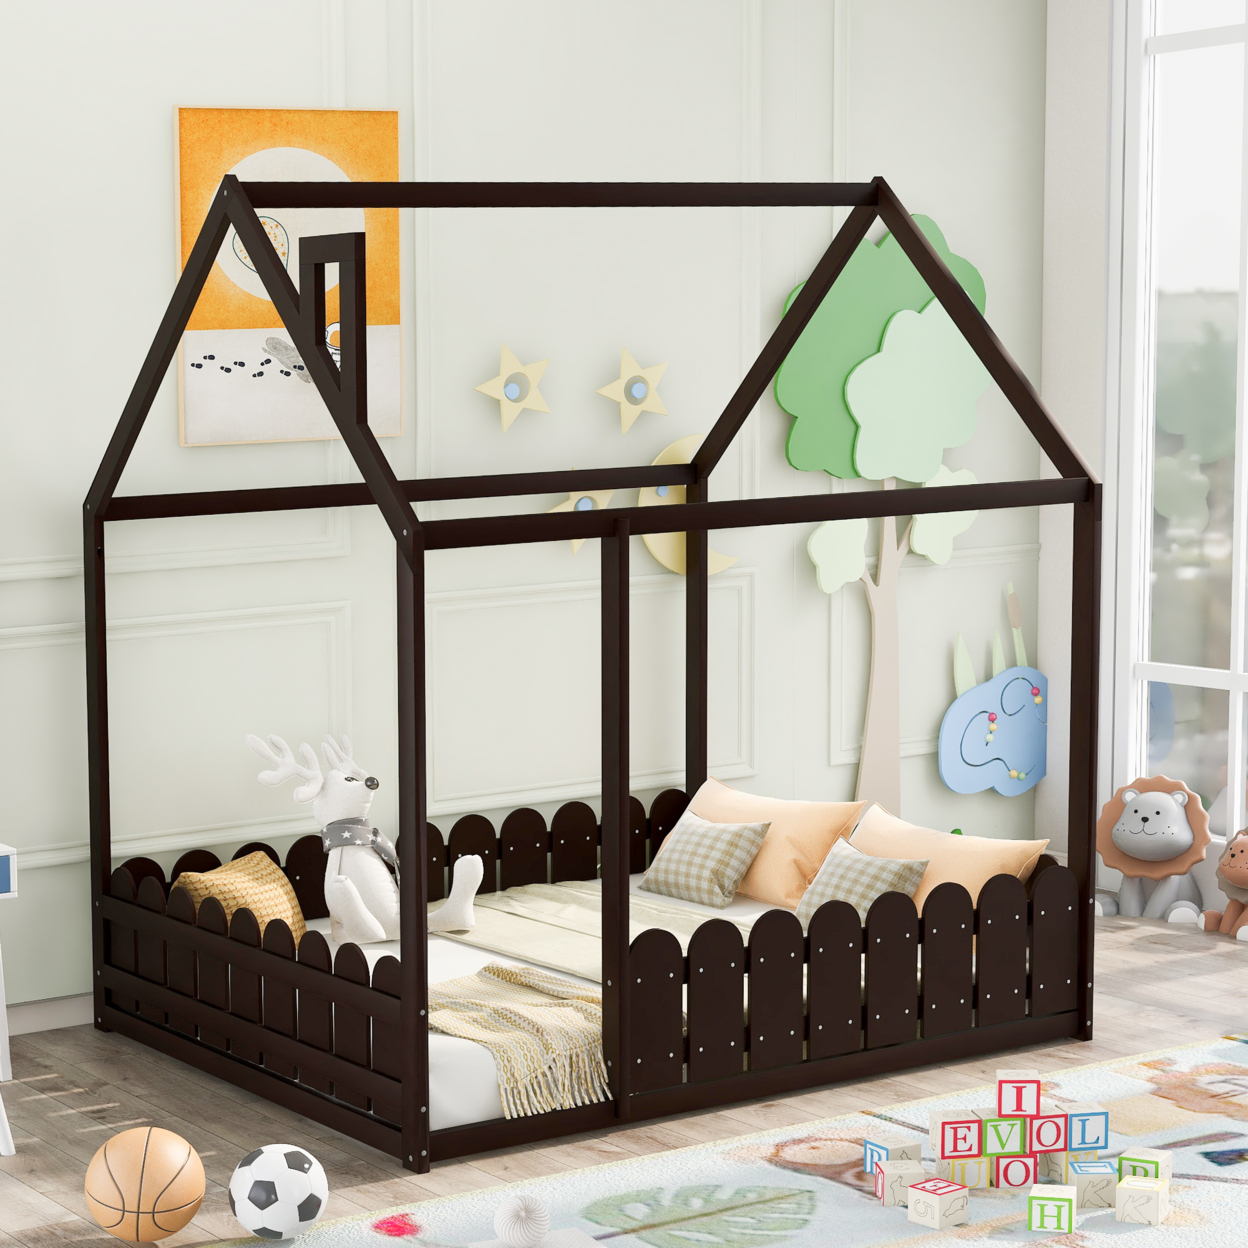 ï¿½ï¿½Slats are not included) Full Size Wood Bed House Bed Frame with Fence, for Kids, Teens, Girls, Boys (Espresso )